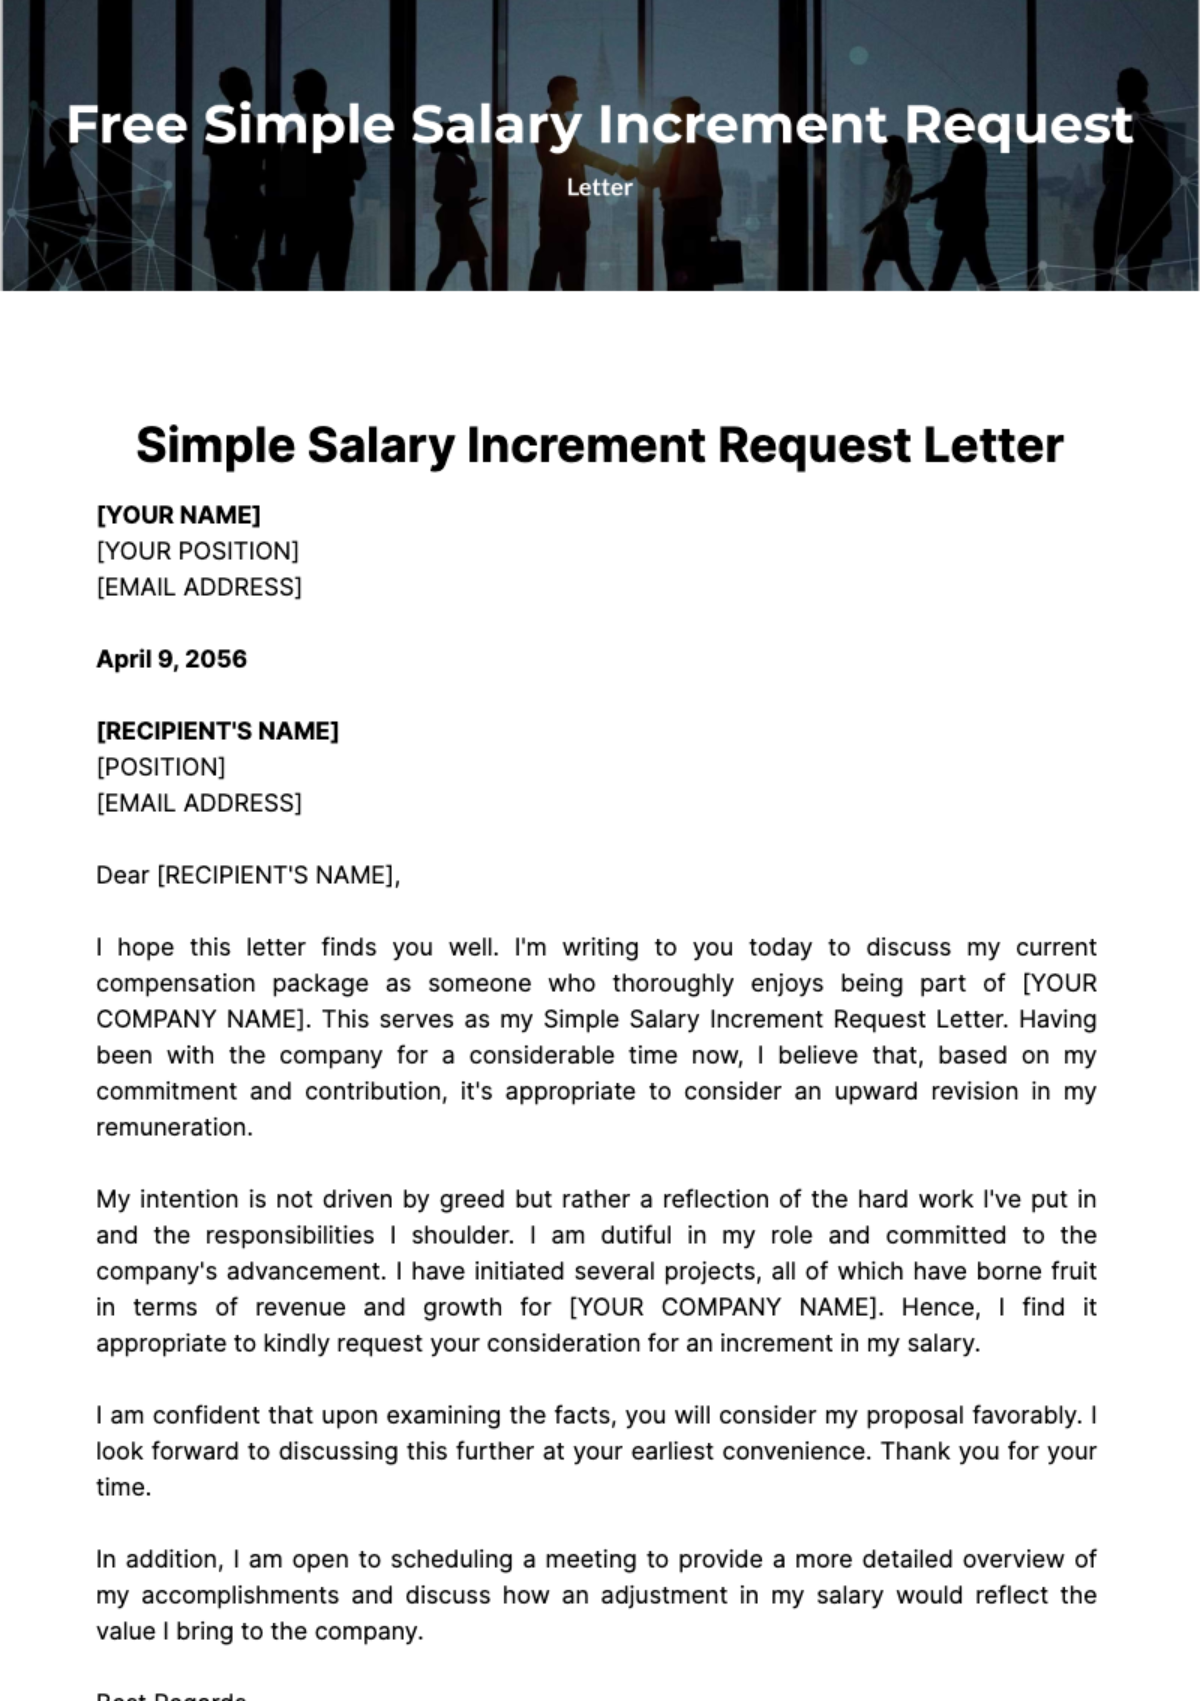 Free Simple Salary Increment Request Letter Template